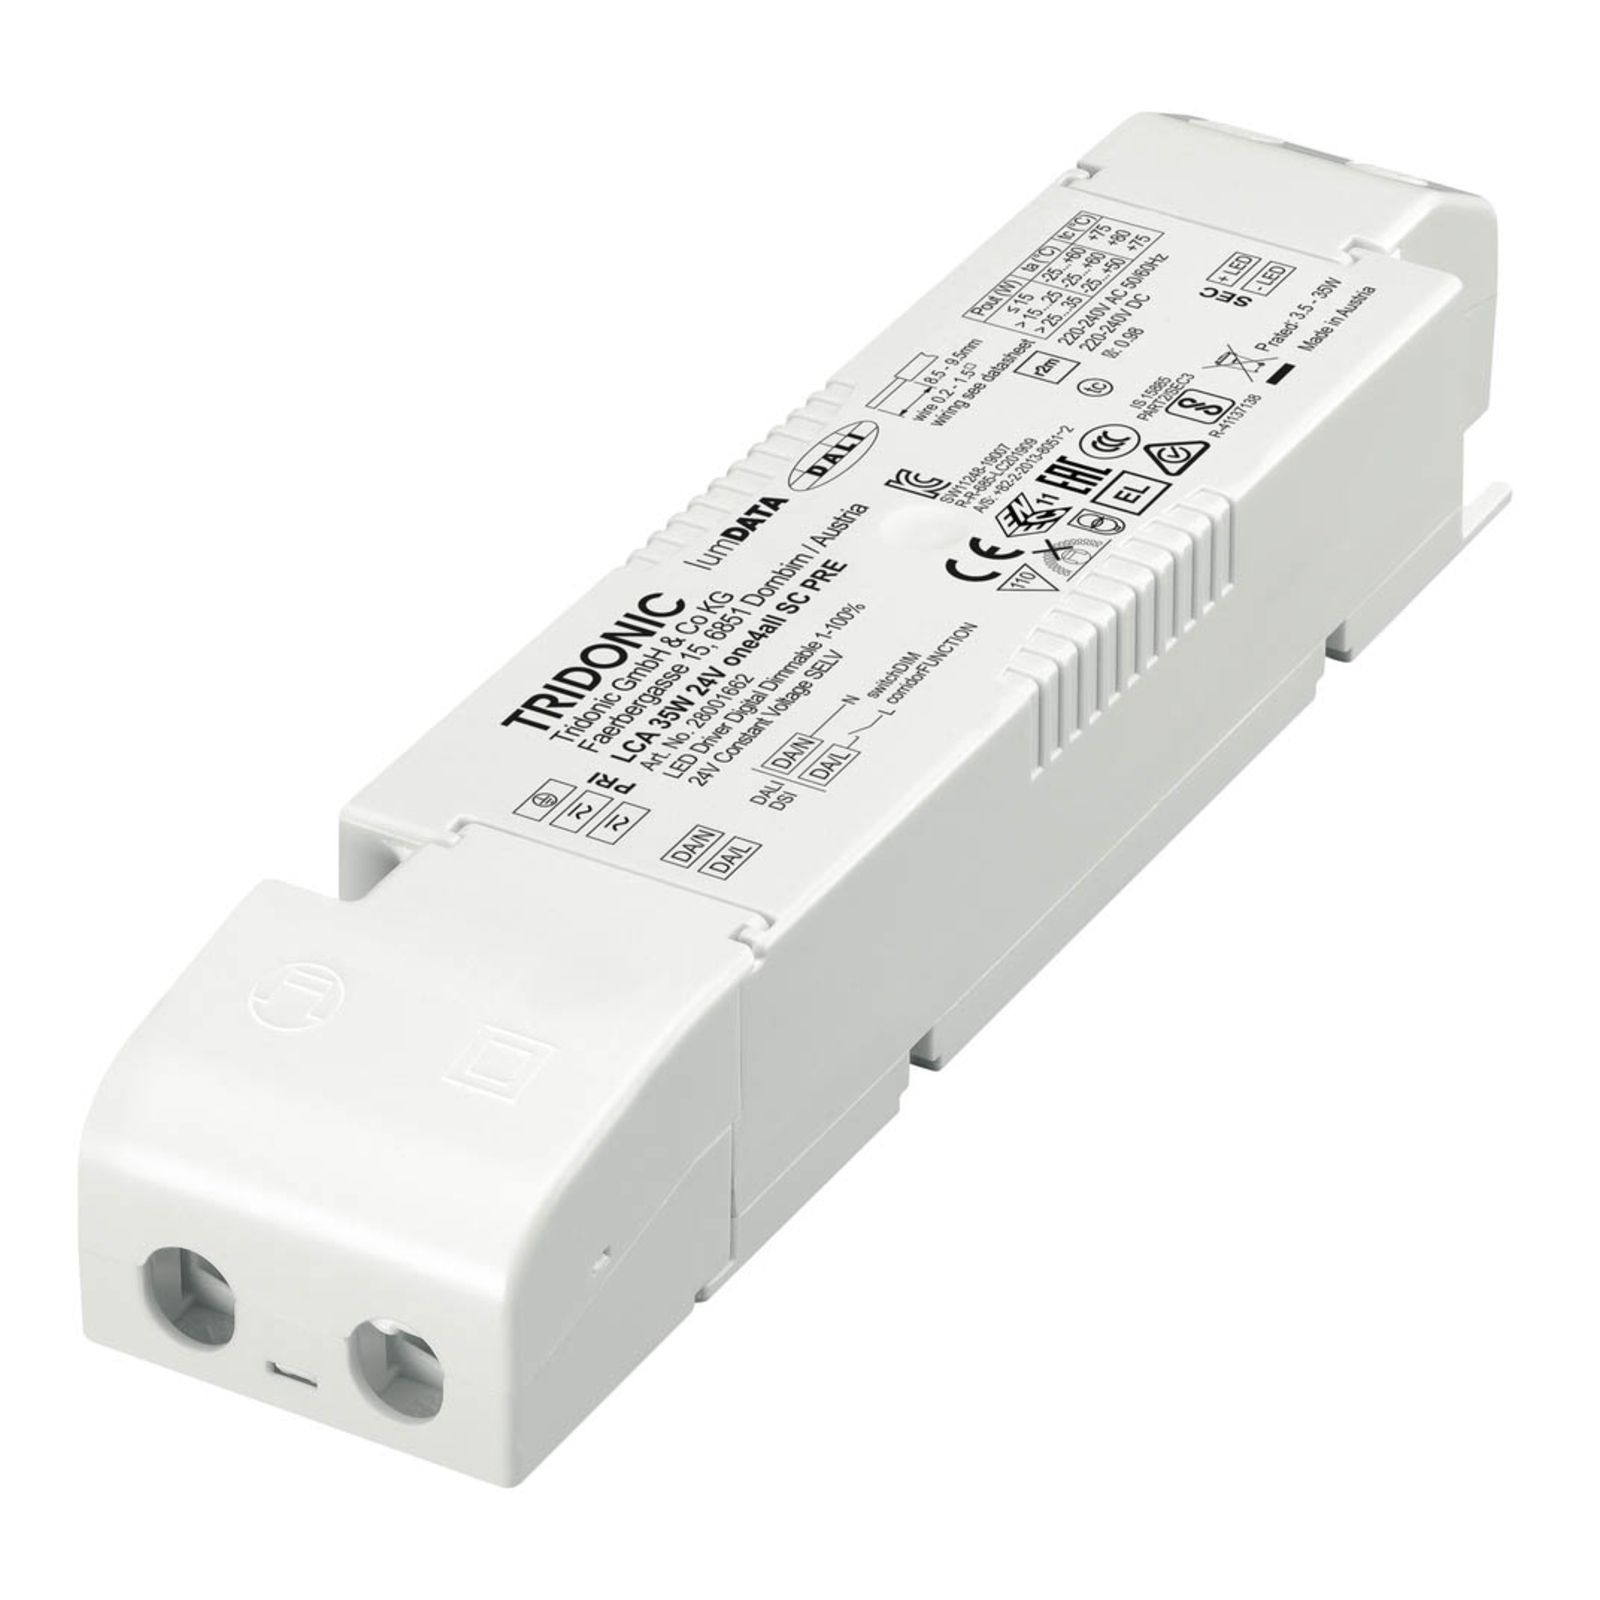 TRIDONIC driver LCA 35W 24V one4all SC PRE dimmable